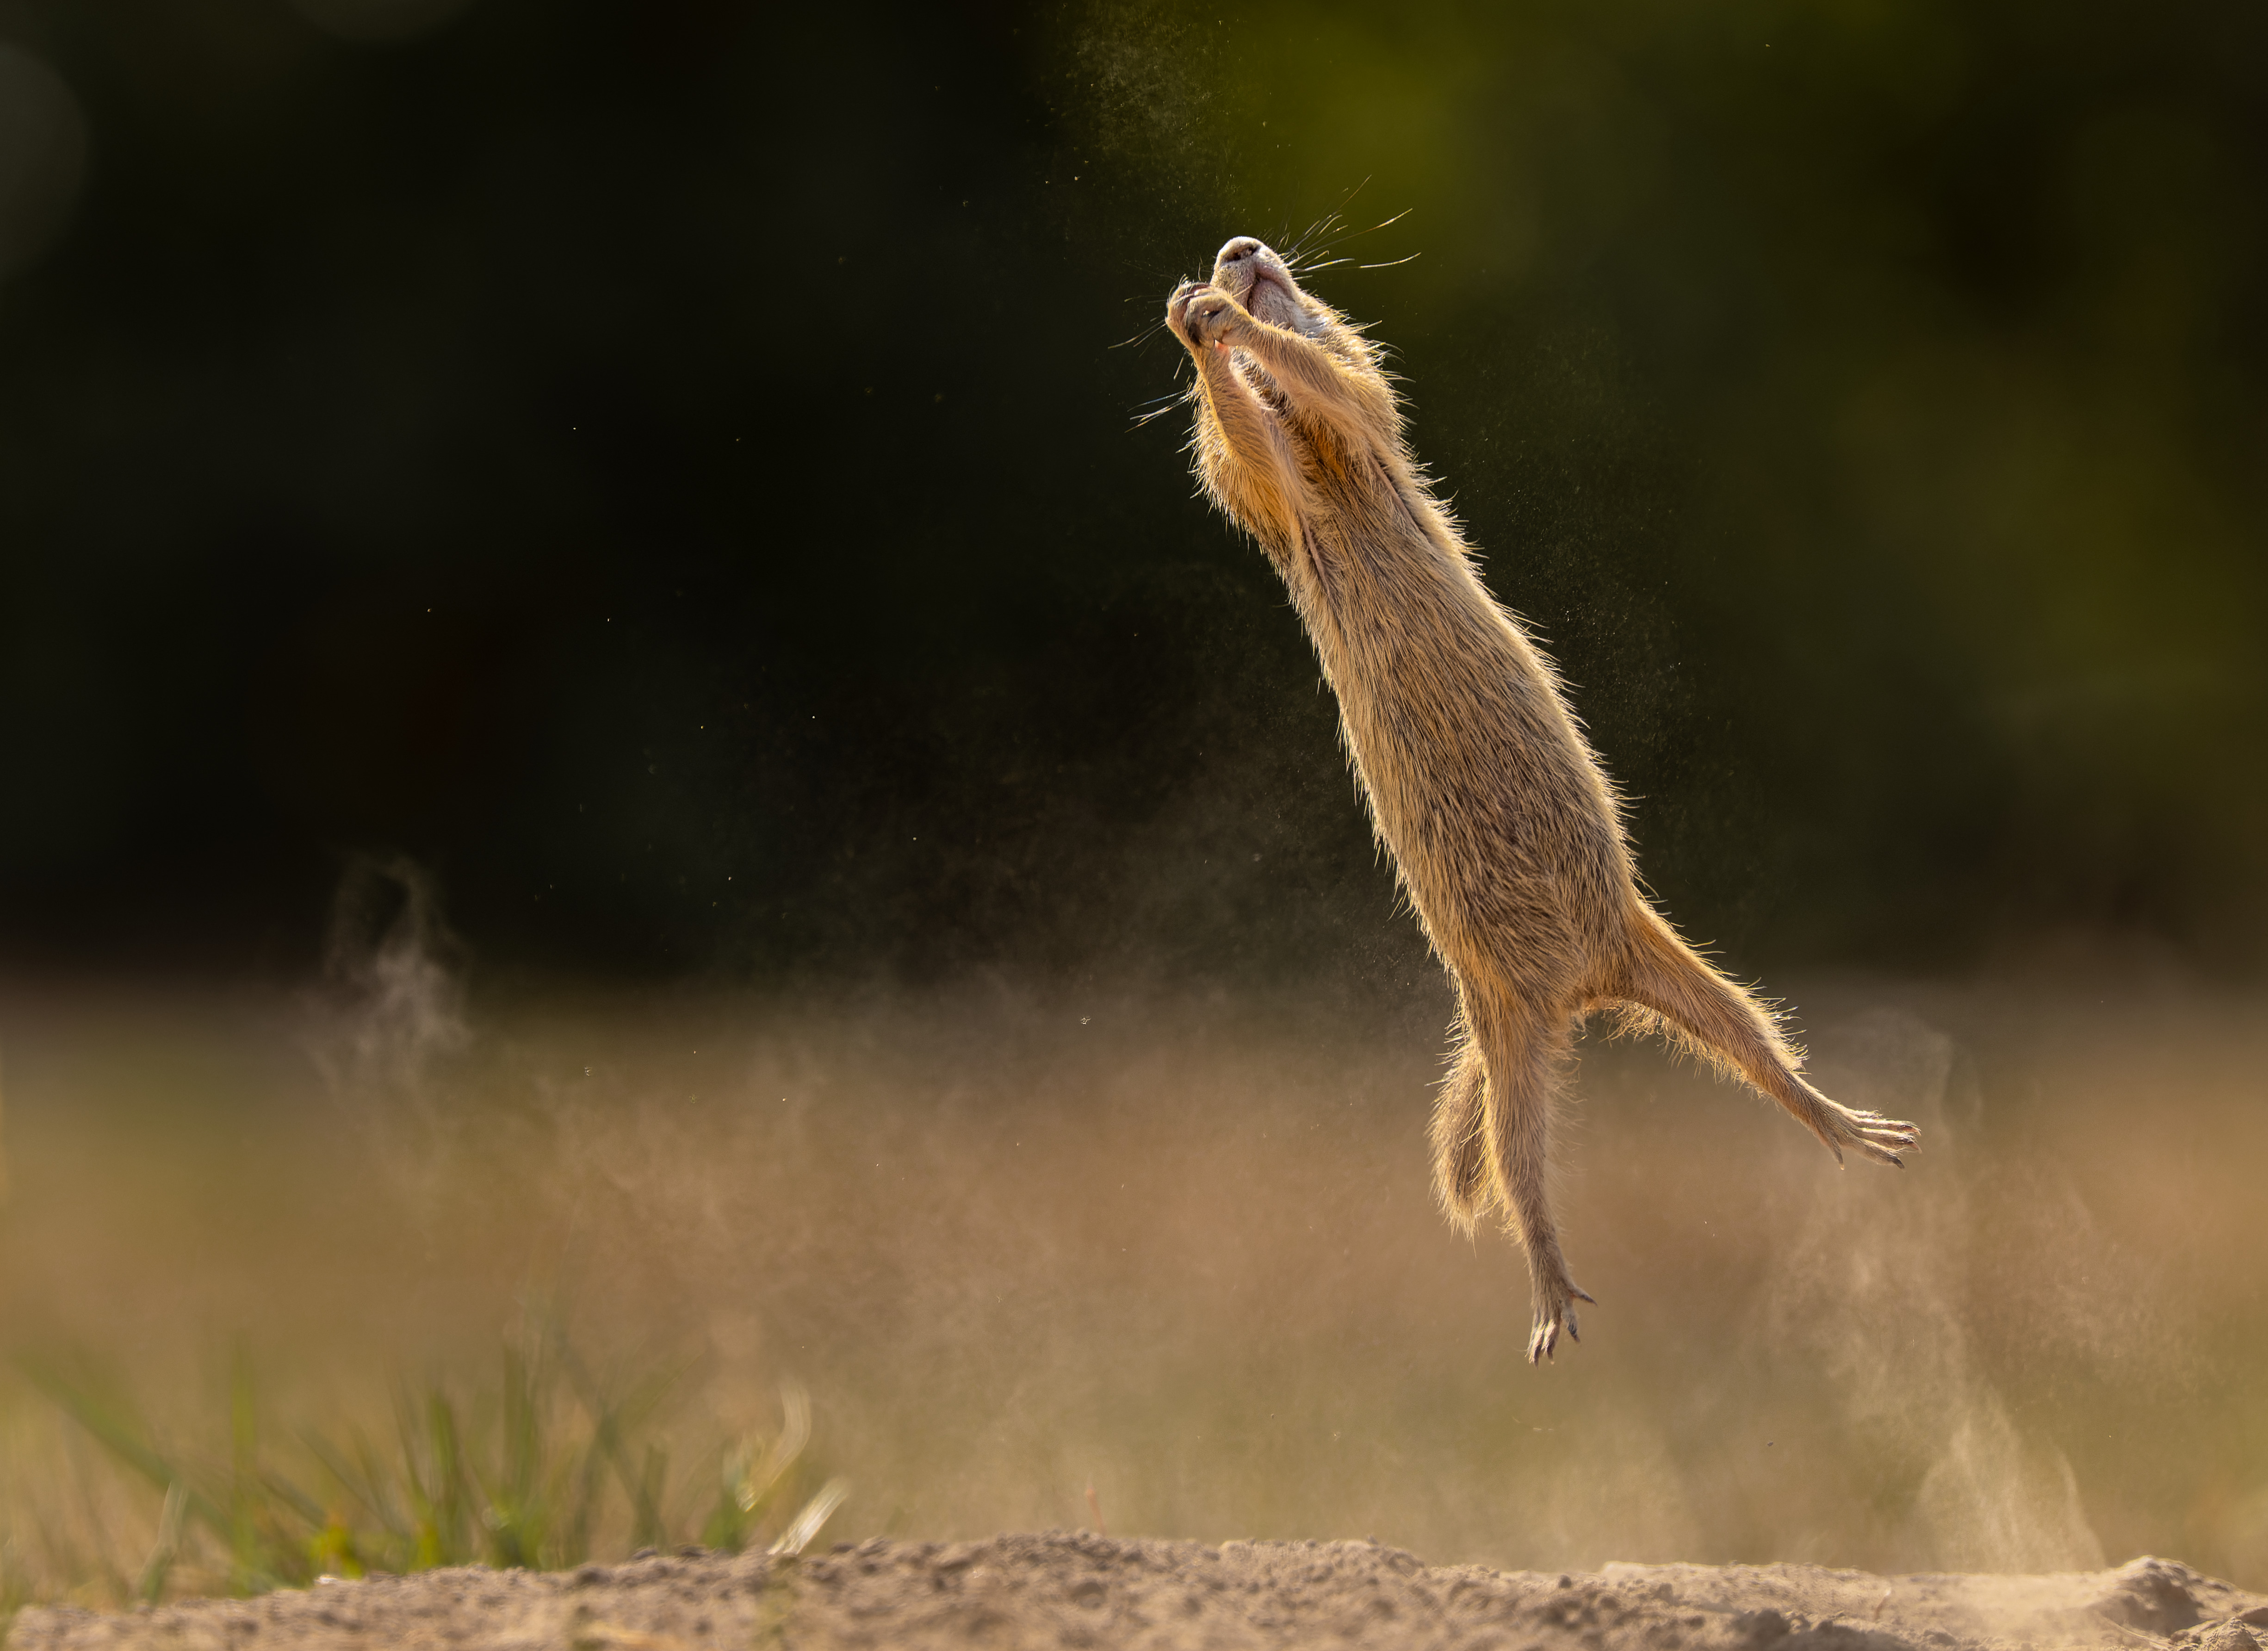 A squirrel jumping in the air